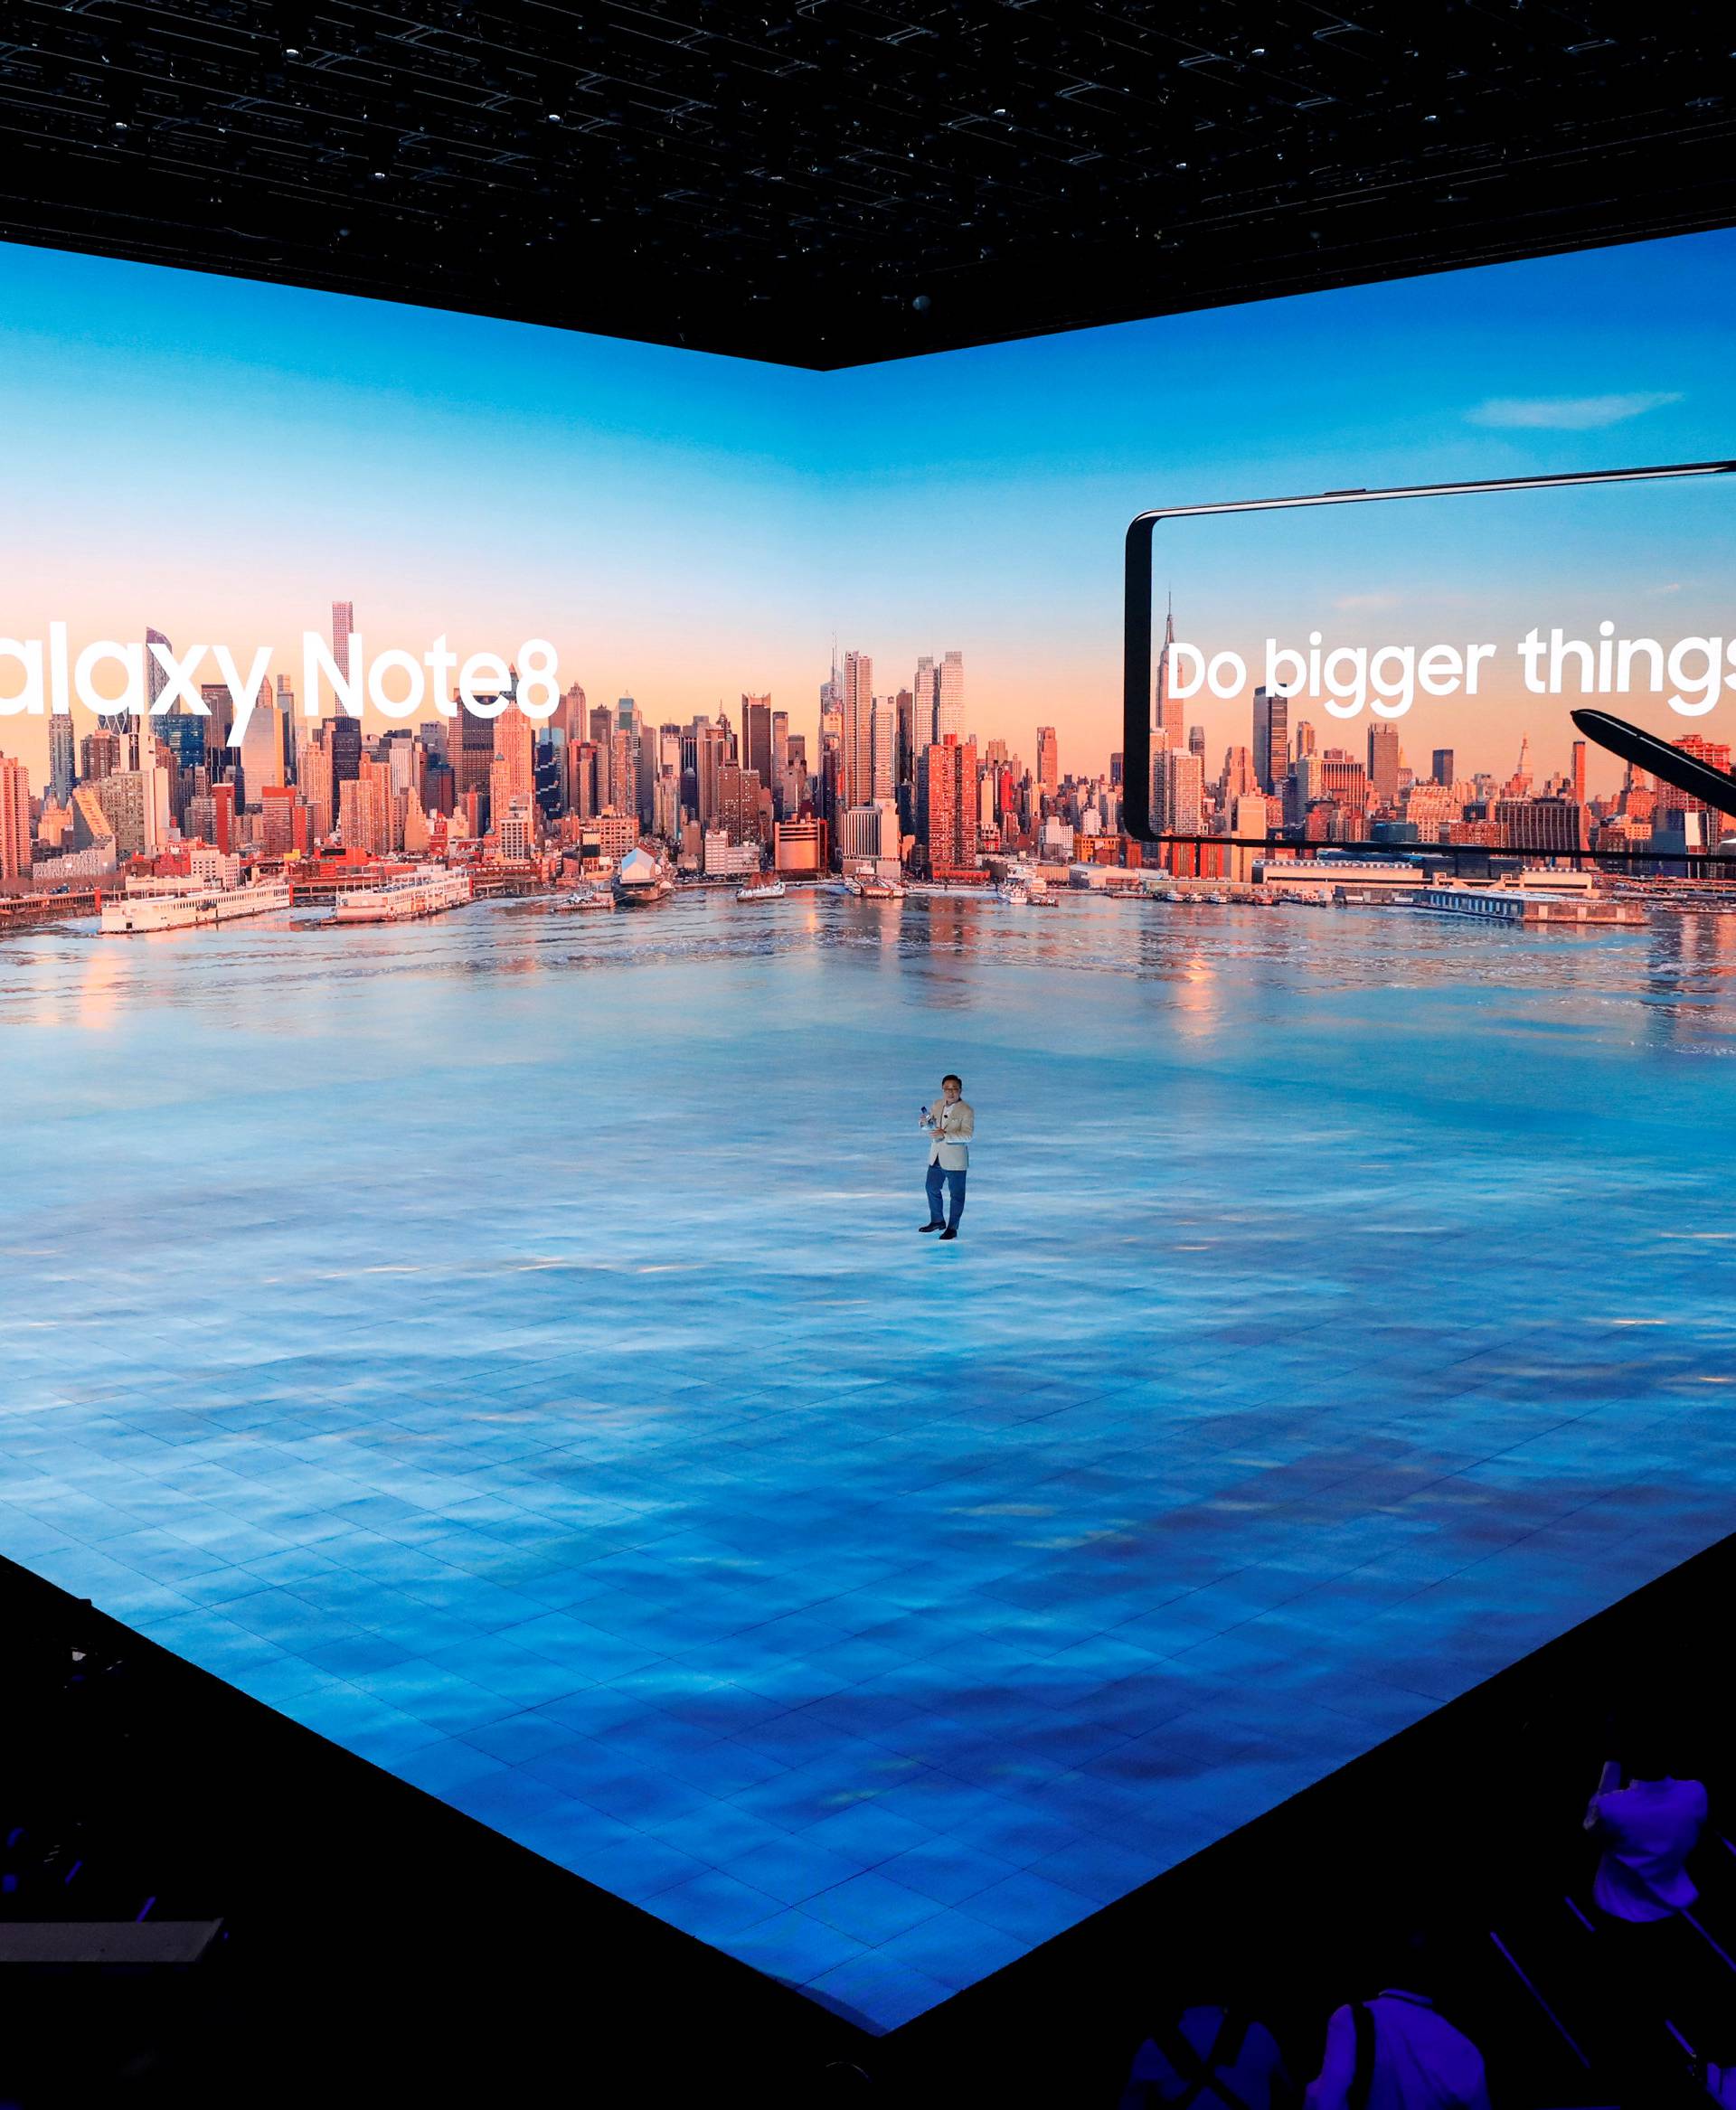 Koh Dong-jin, president of Samsung Electronics' Mobile Communications introduces the Galaxy Note 8 smartphone during a launch event in New York City